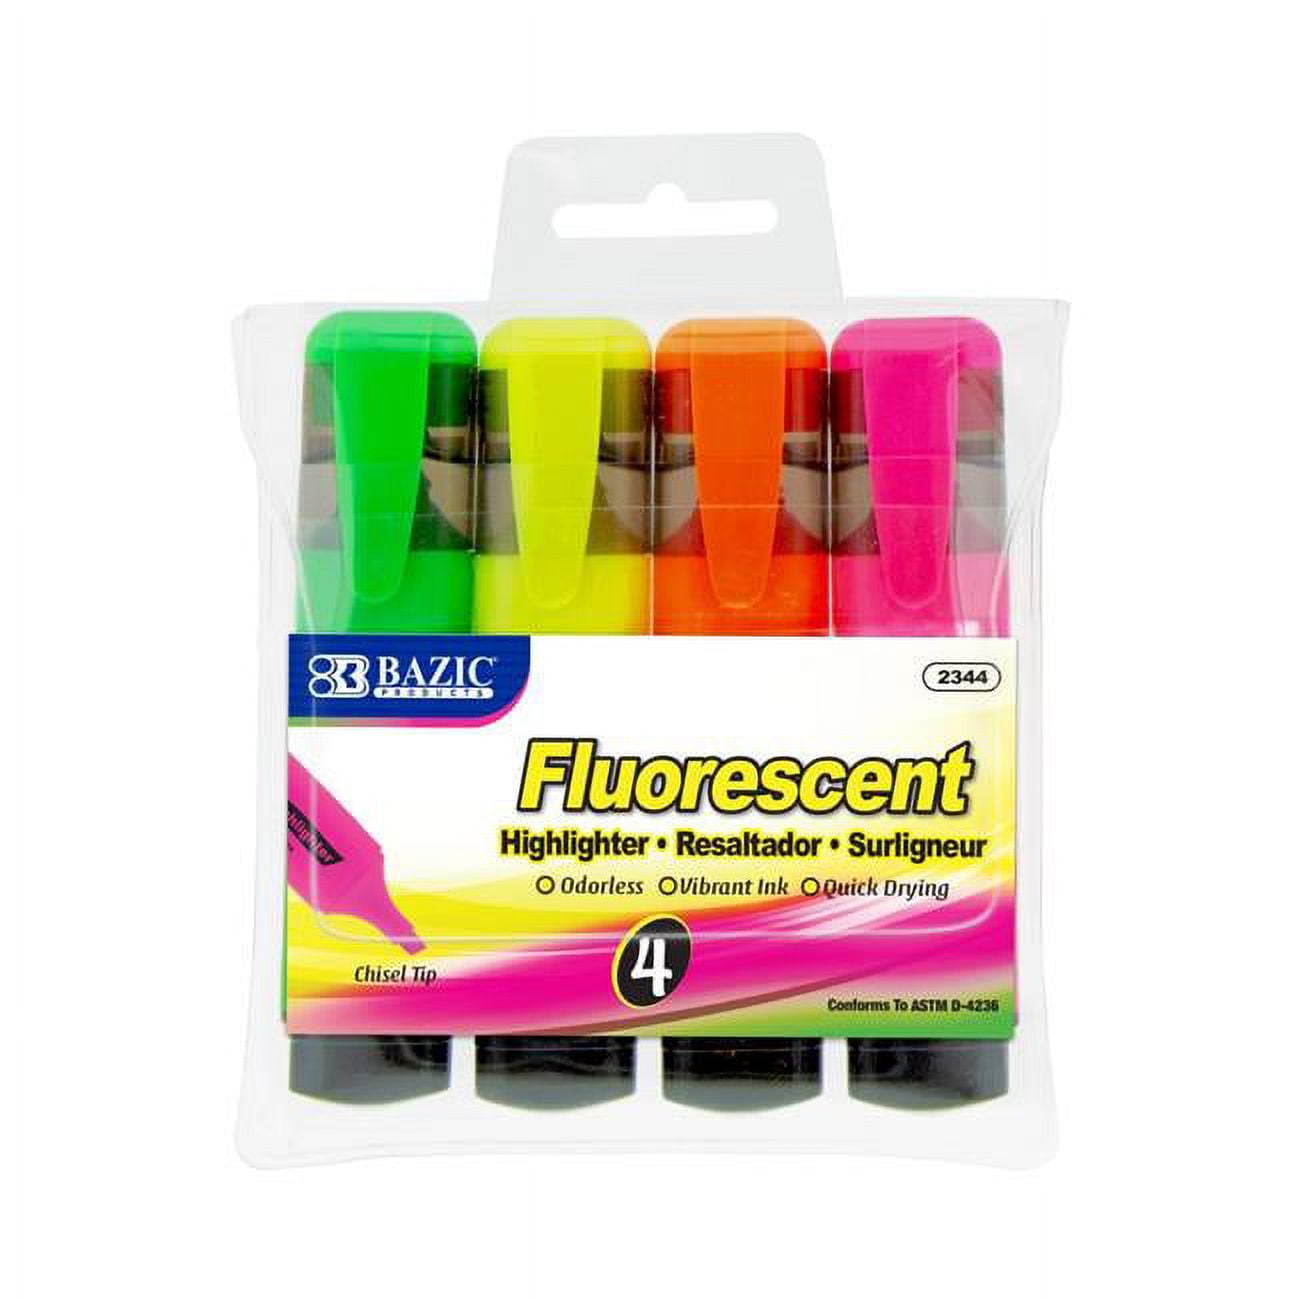 2344 Fluorescent Highlighters With Pocket Clip, Pack Of 4 - Case Of 24